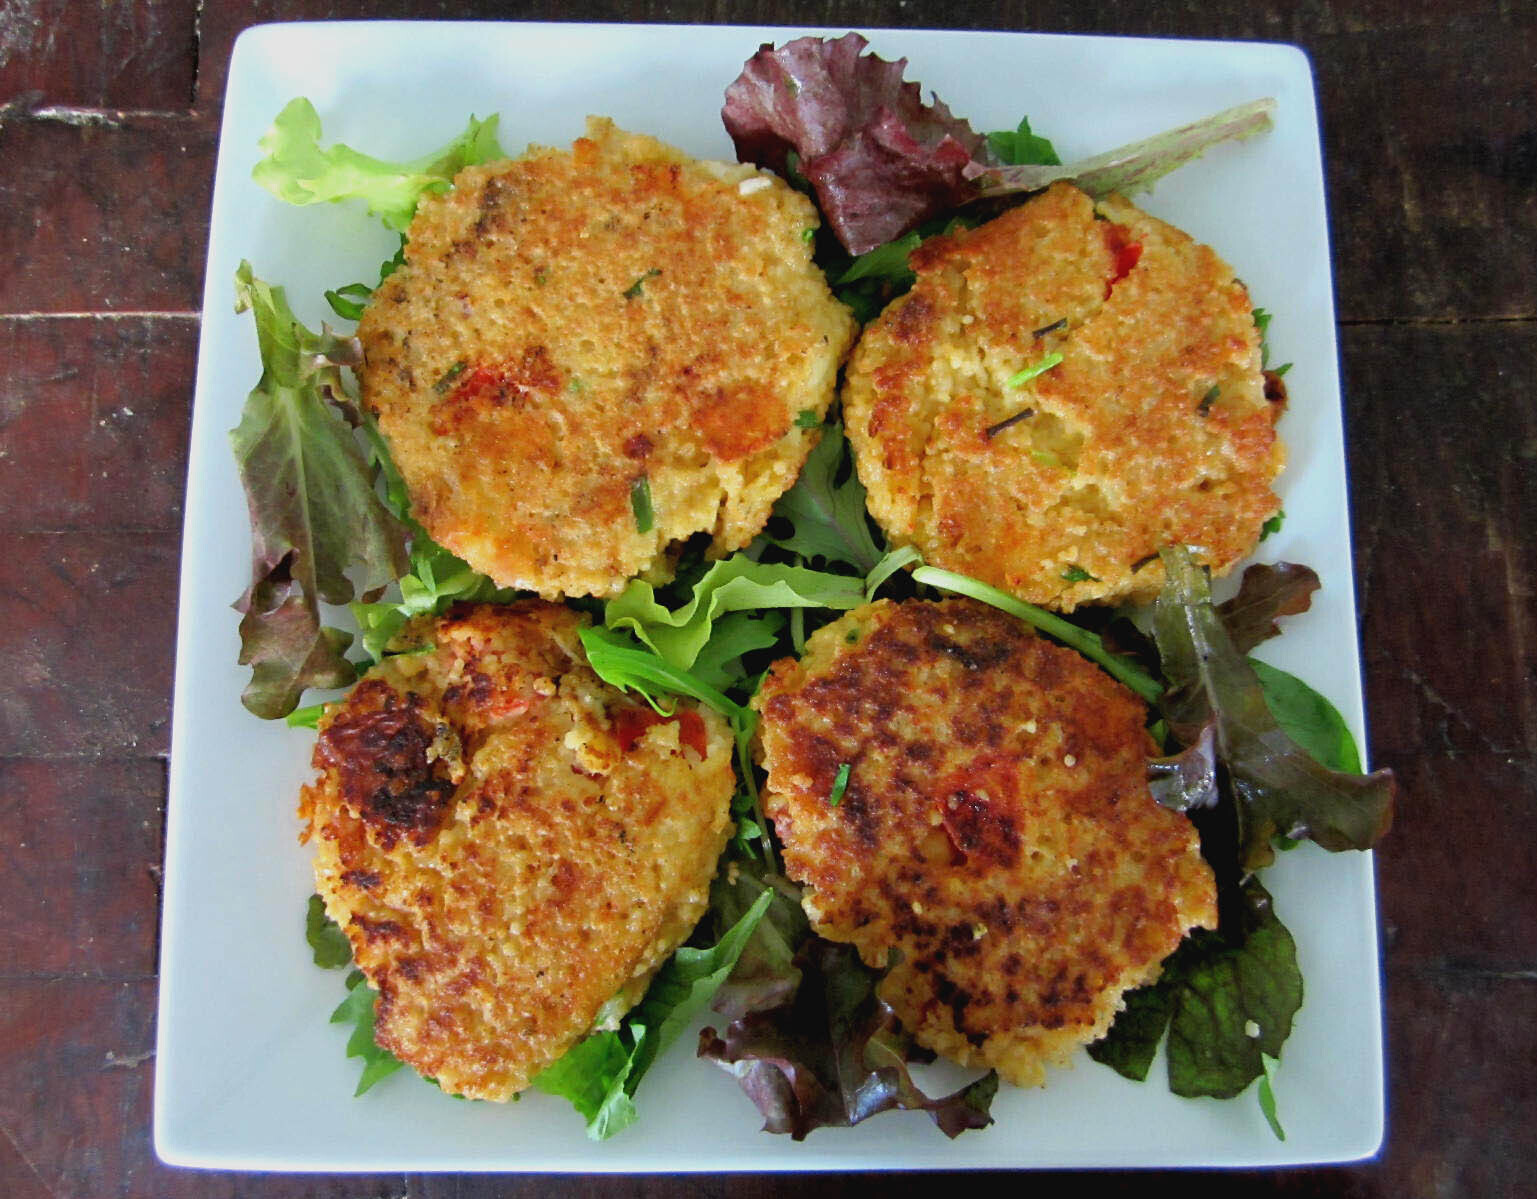 Four tomato whole wheat couscous cakes on a bed of lettuce